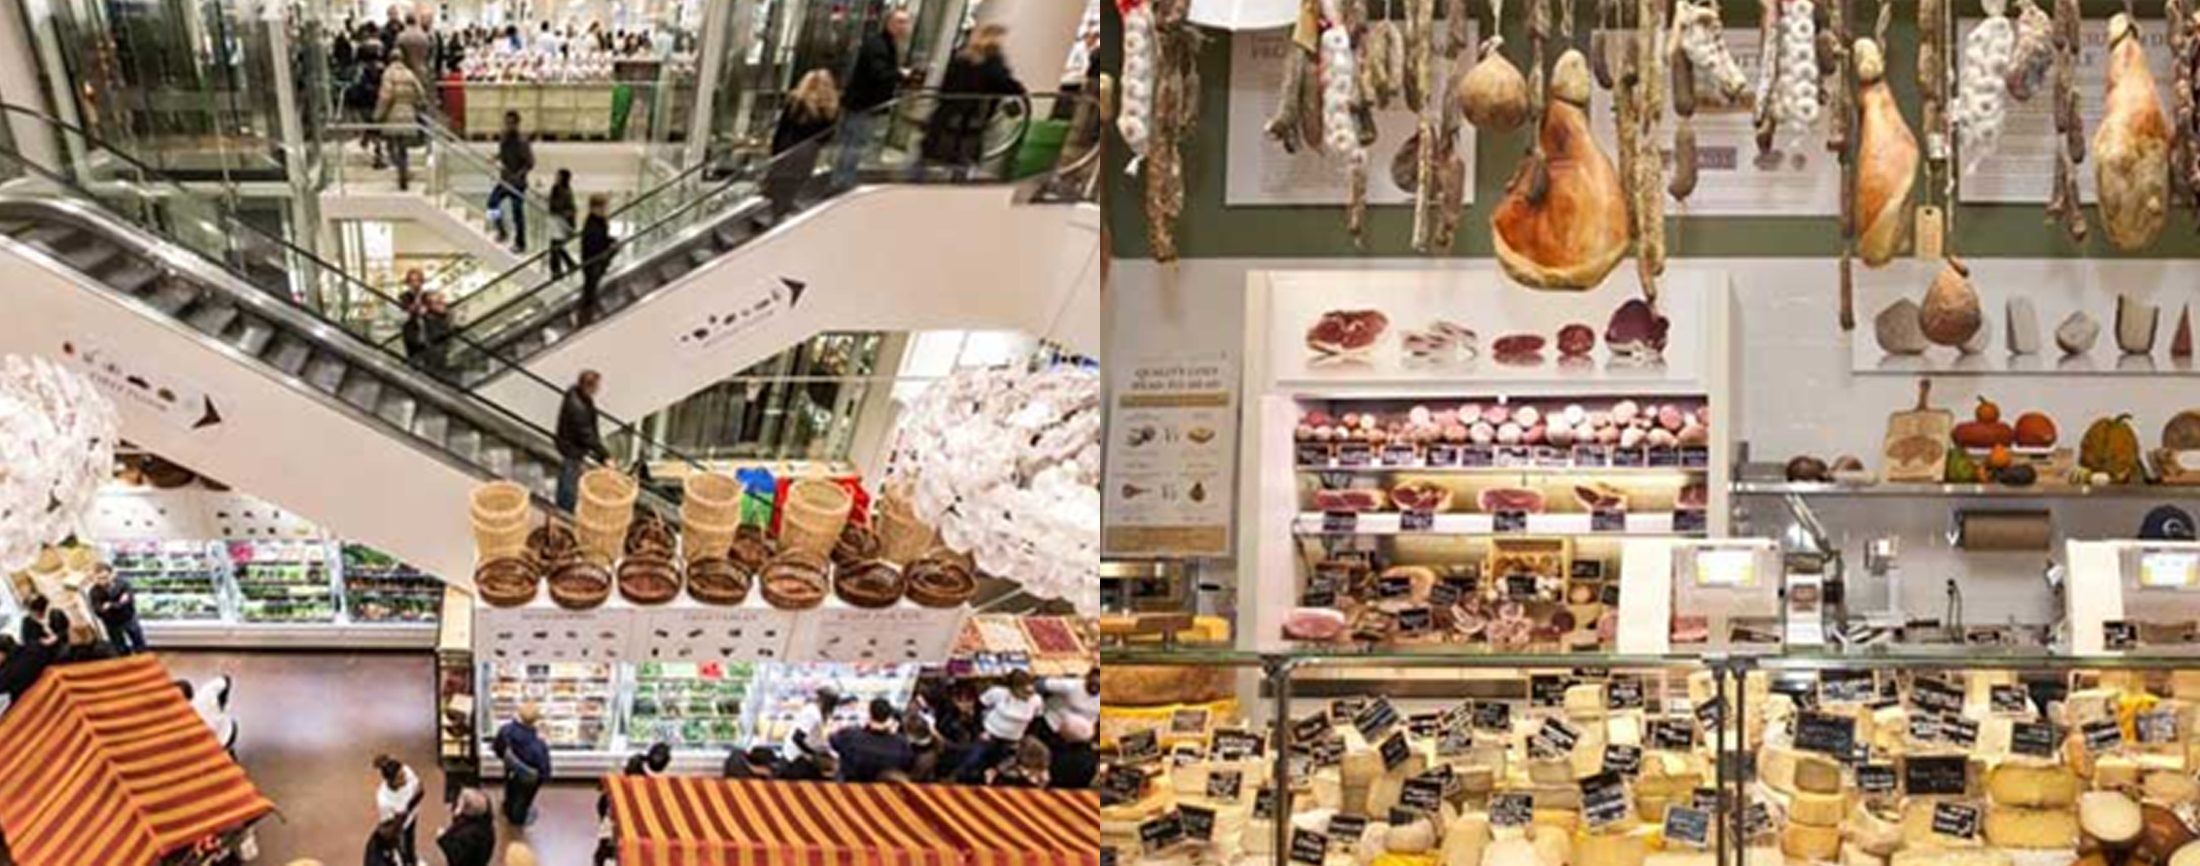 Eataly Is Coming To Boston!